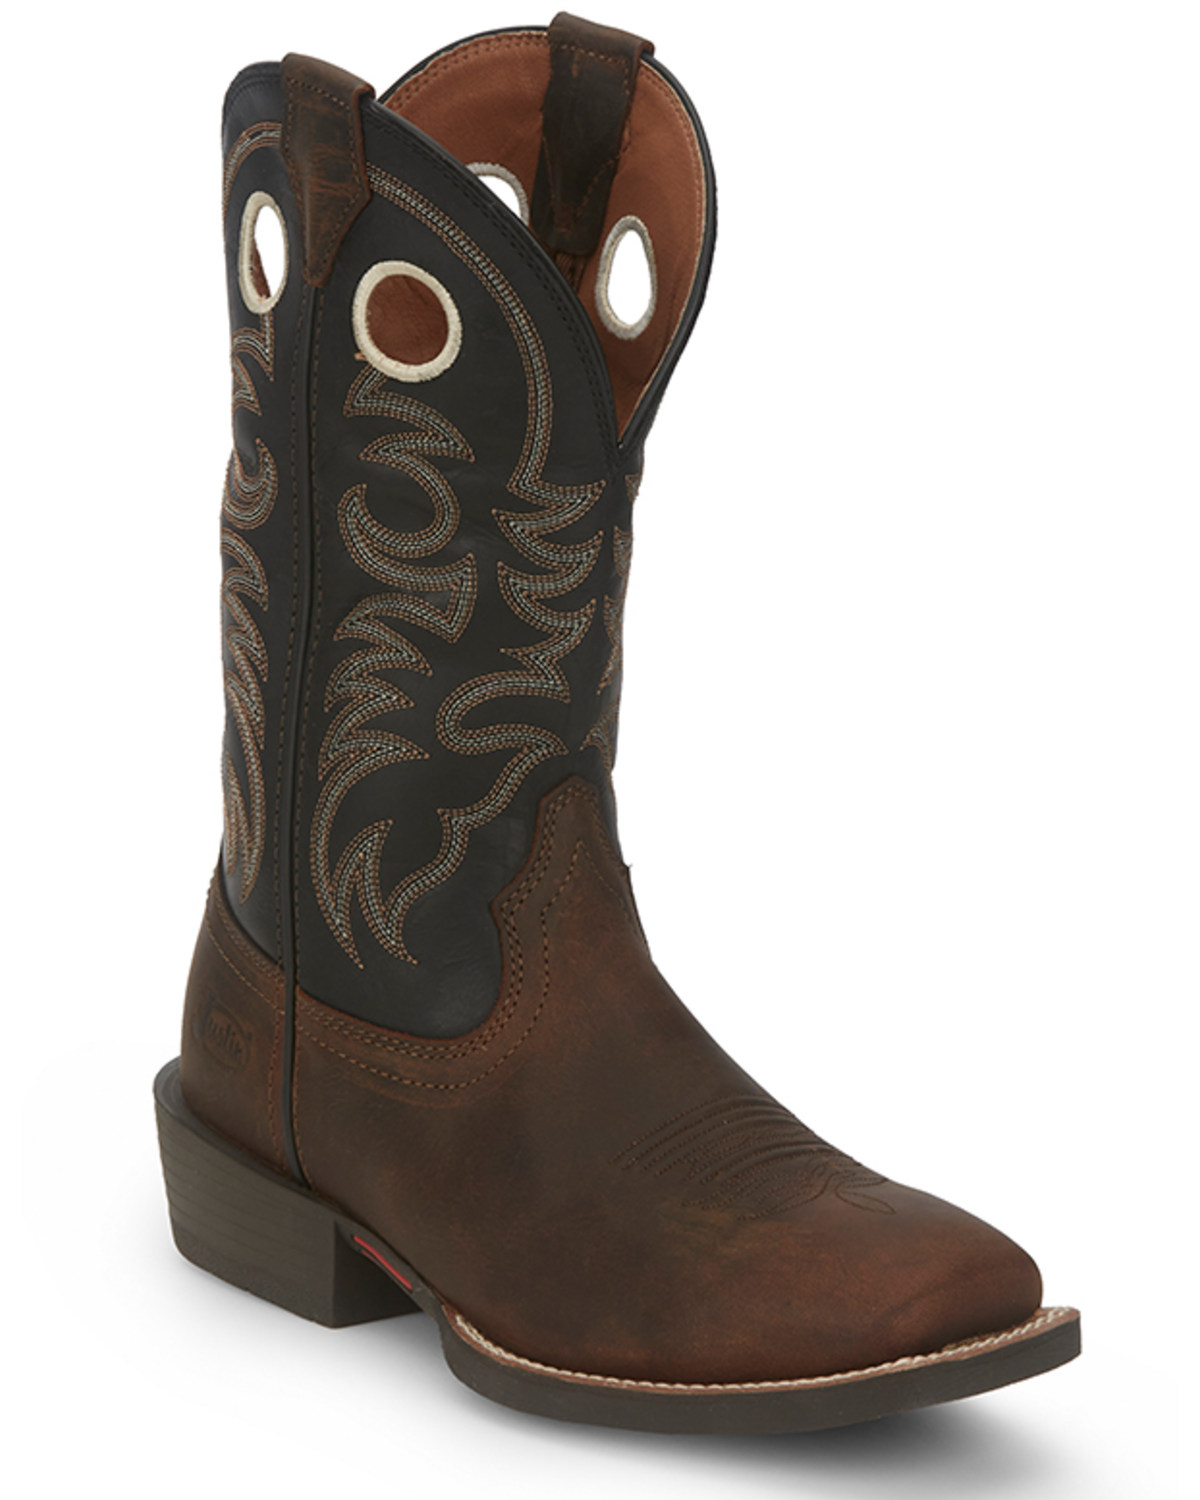 Justin Men's Muley Performance Western Boots - Broad Square Toe